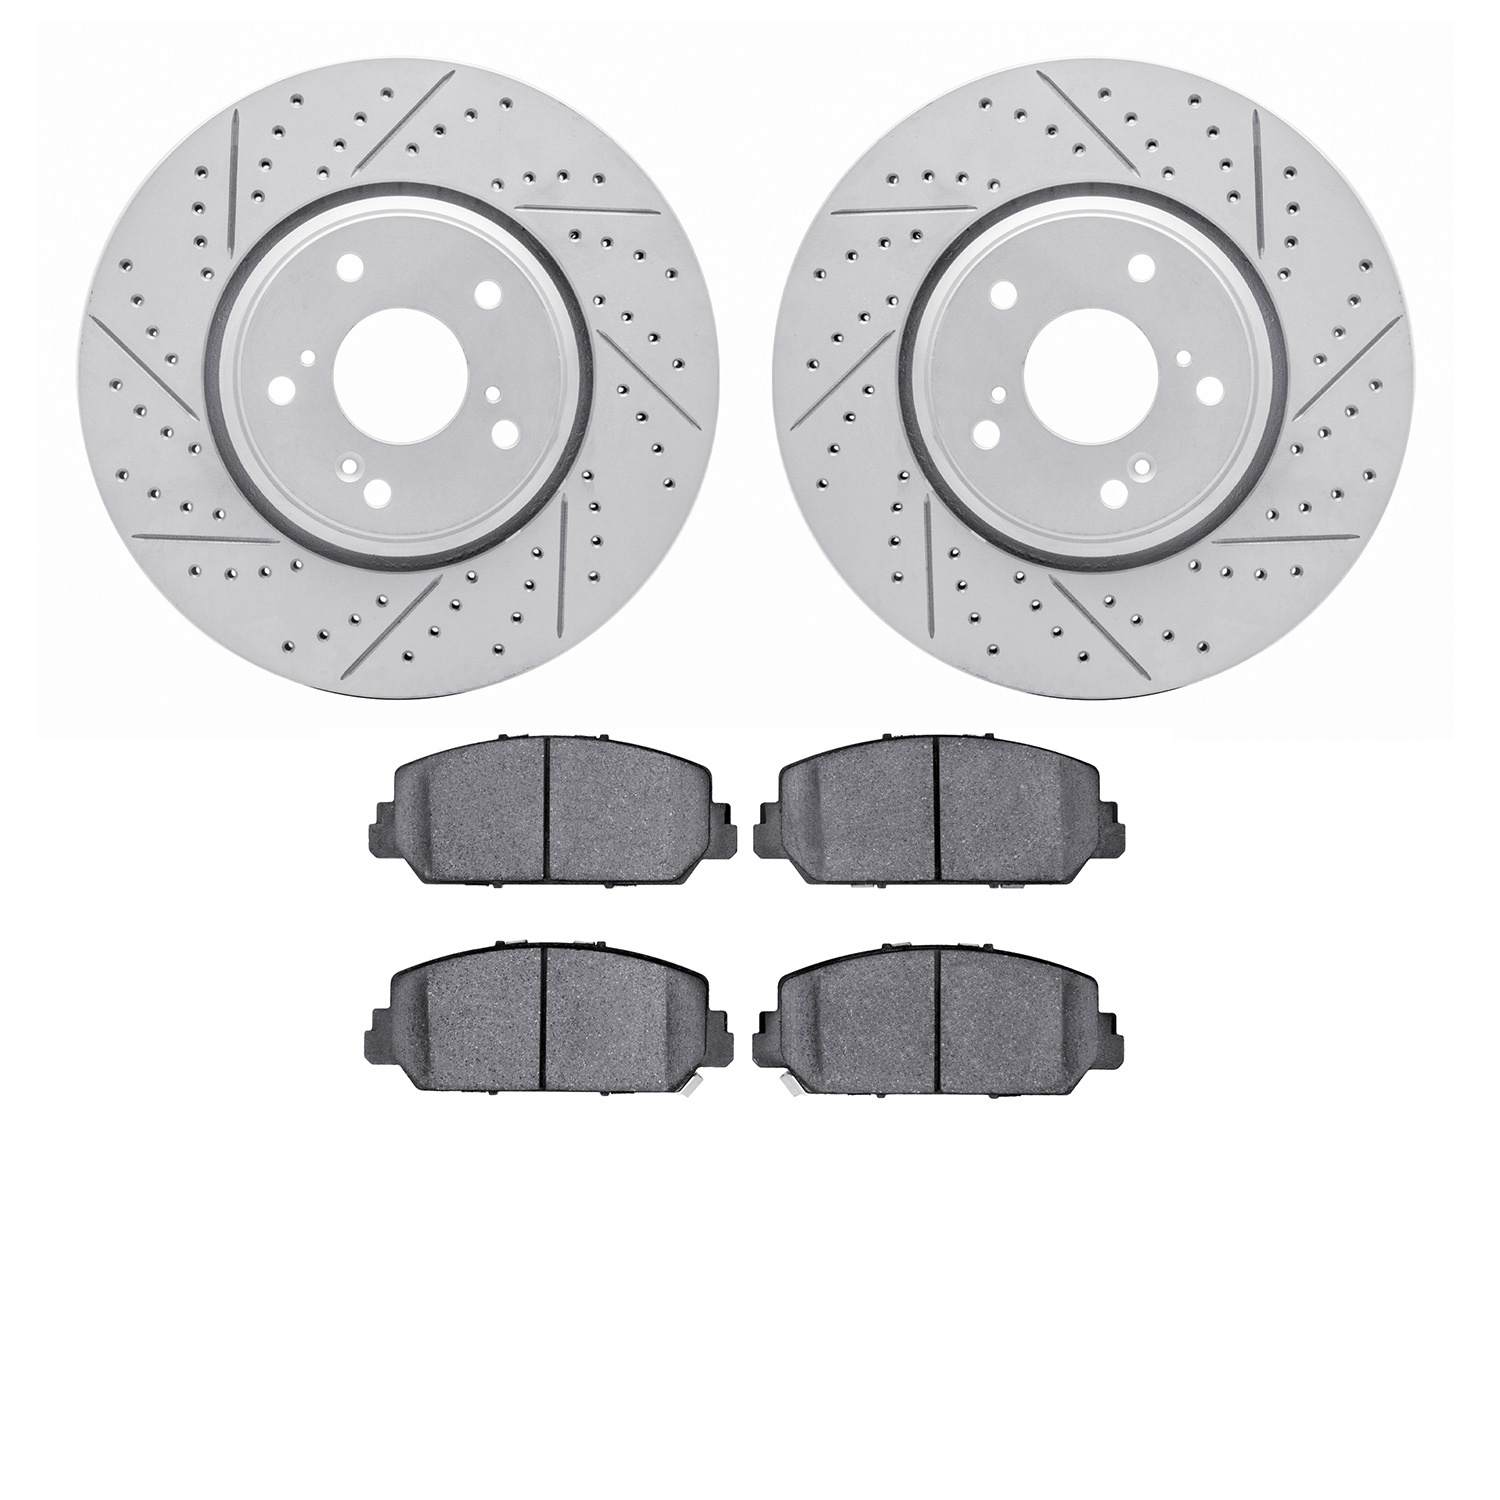 2502-59095 Geoperformance Drilled/Slotted Rotors w/5000 Advanced Brake Pads Kit, Fits Select Acura/Honda, Position: Front